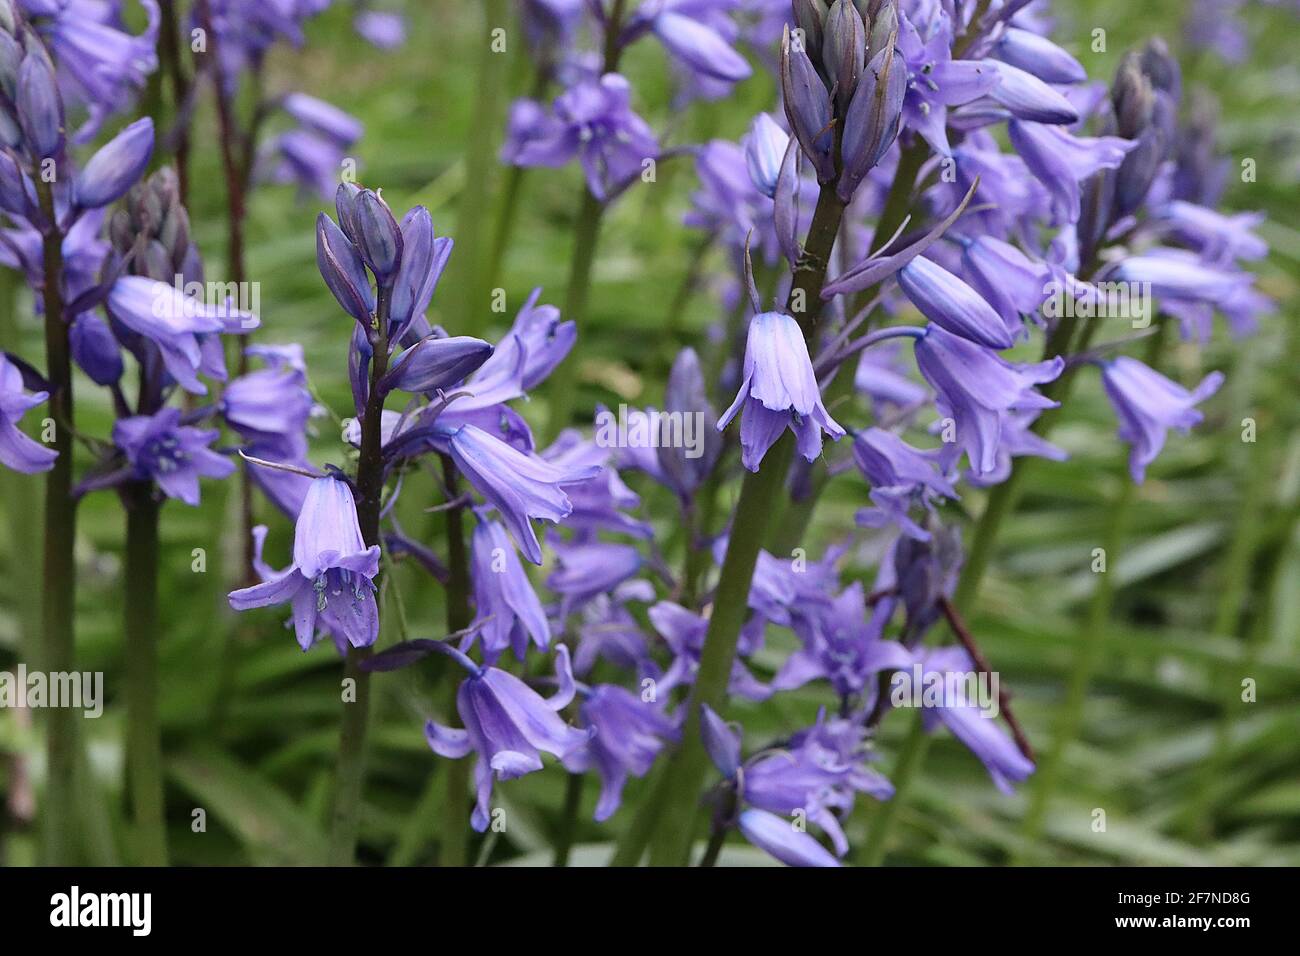 Hyacinthoides hispanica ‘Excelsior’ Spanish bluebells – pale mauve bell-shaped flowers with blue stripes,  April, England, UK Stock Photo